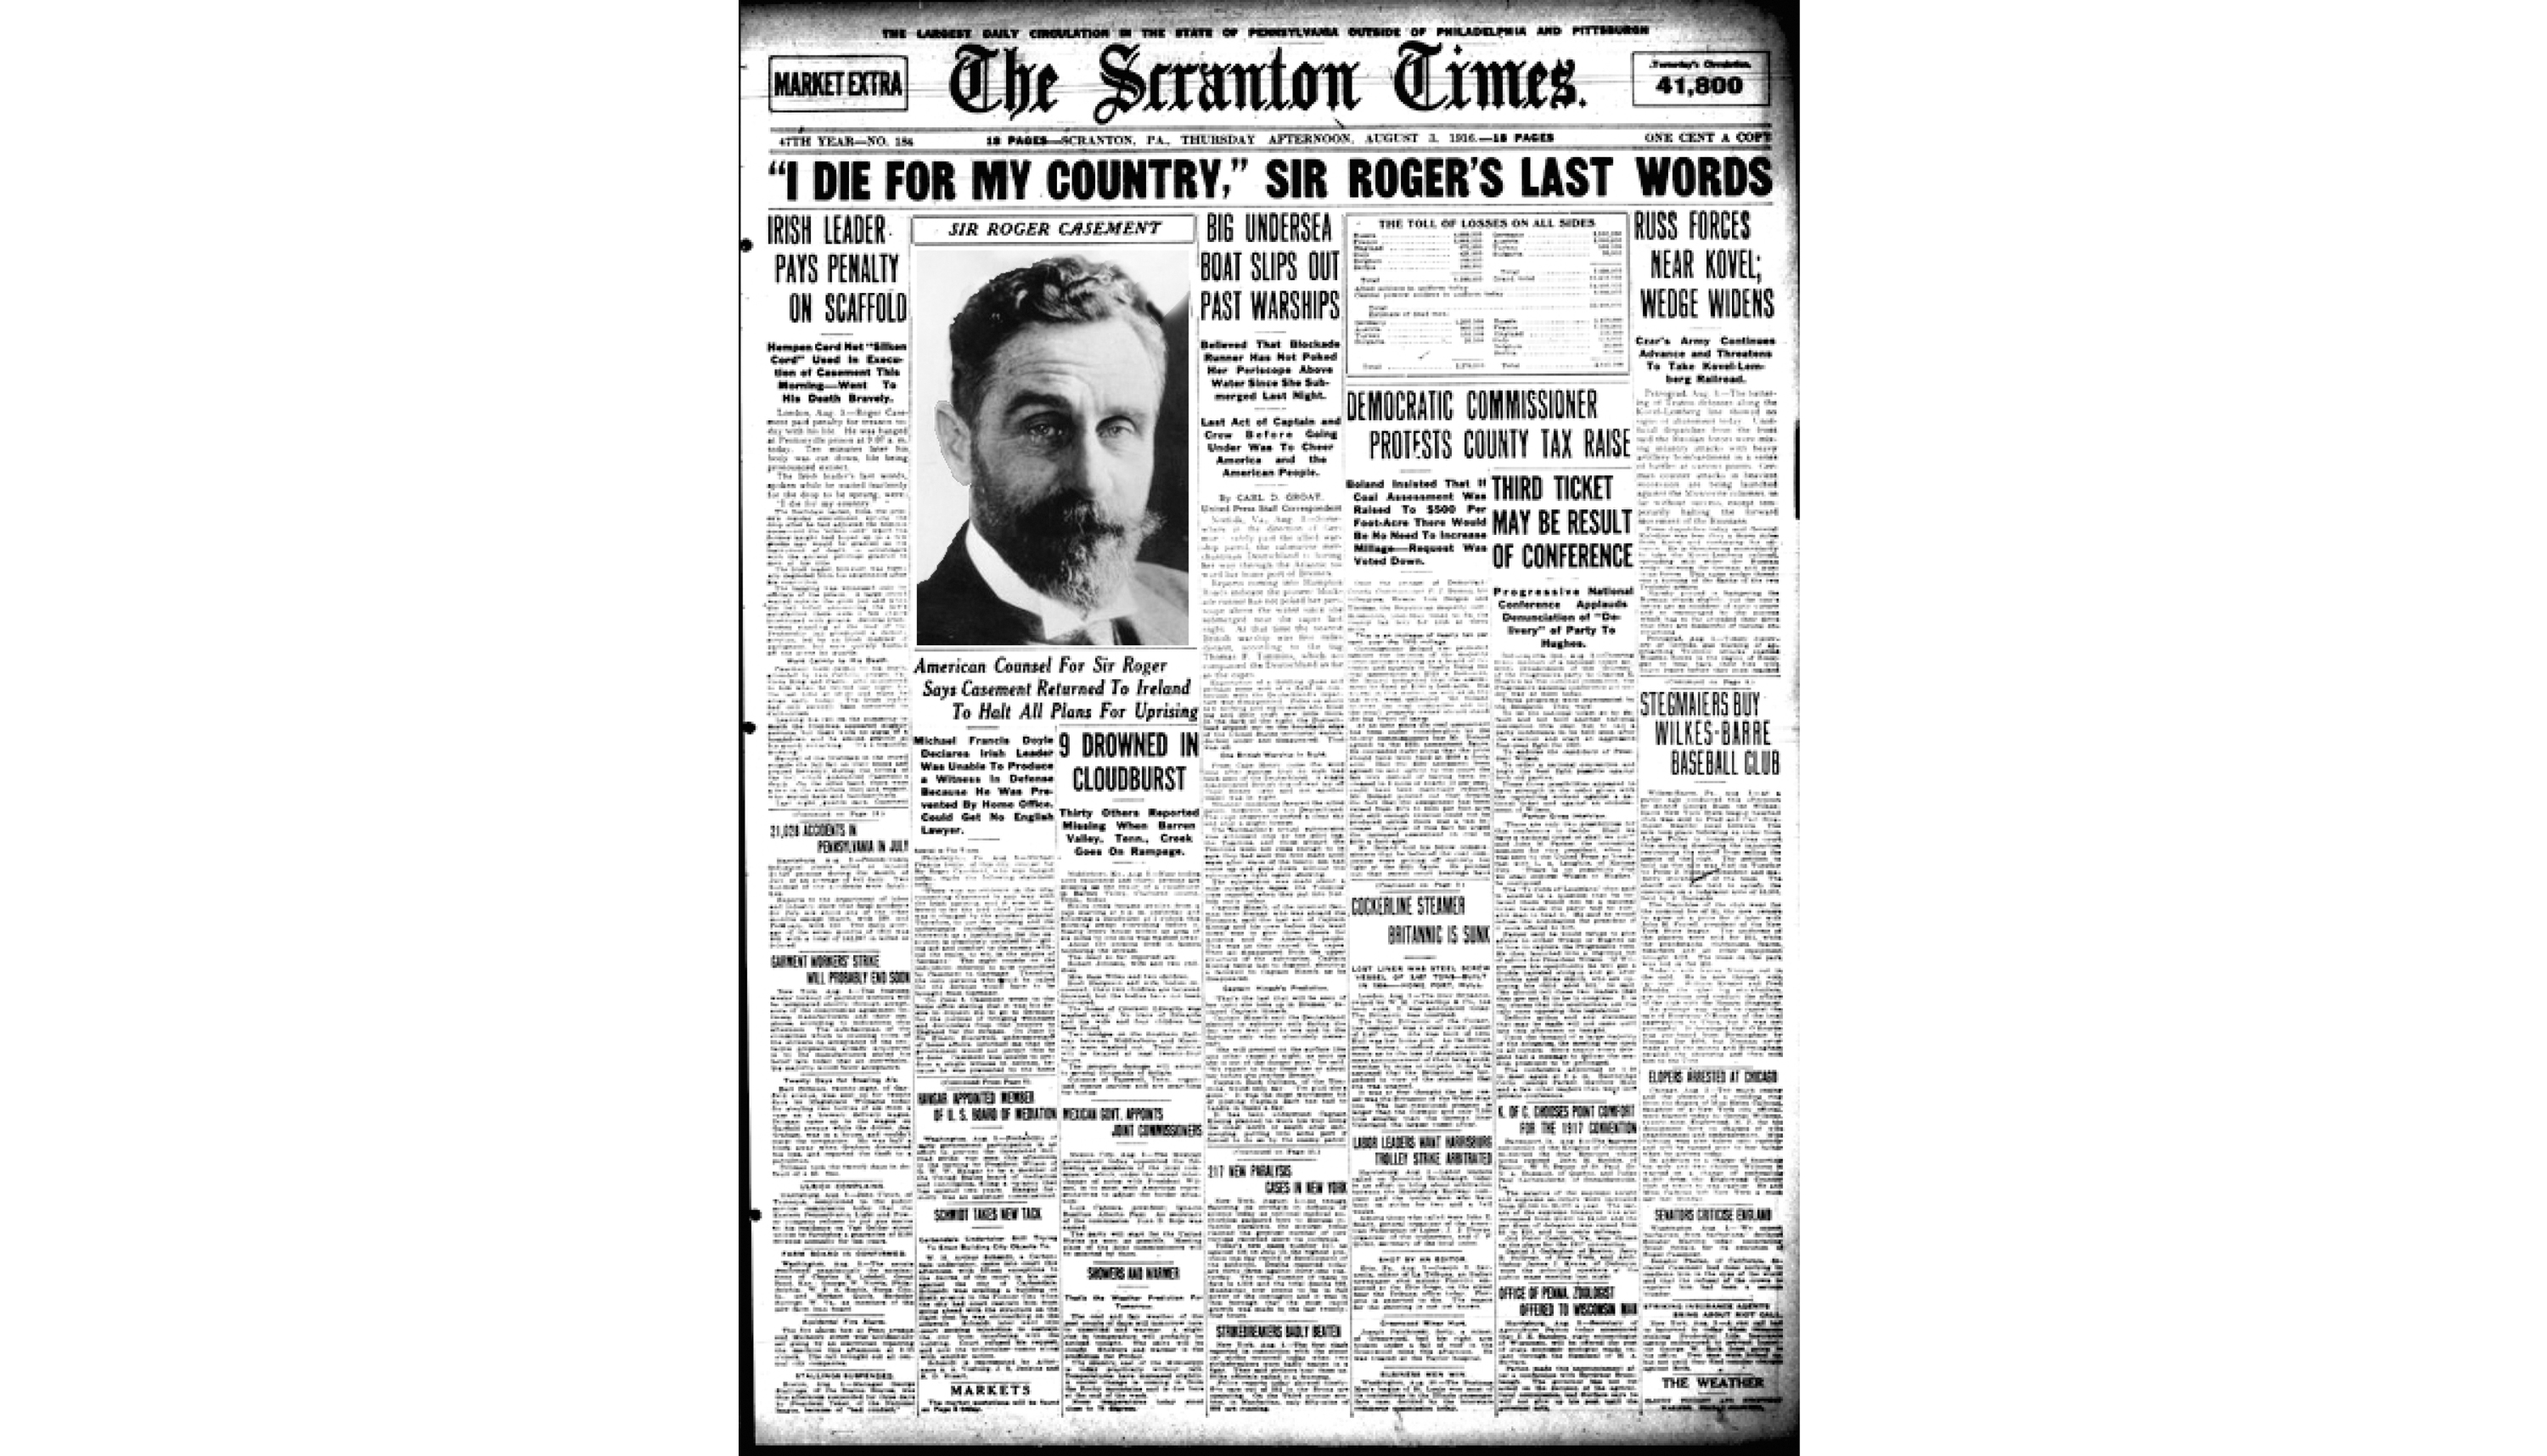 August 1, 1916: The Scranton Times reported on the hanging of Sir Roger Casement.